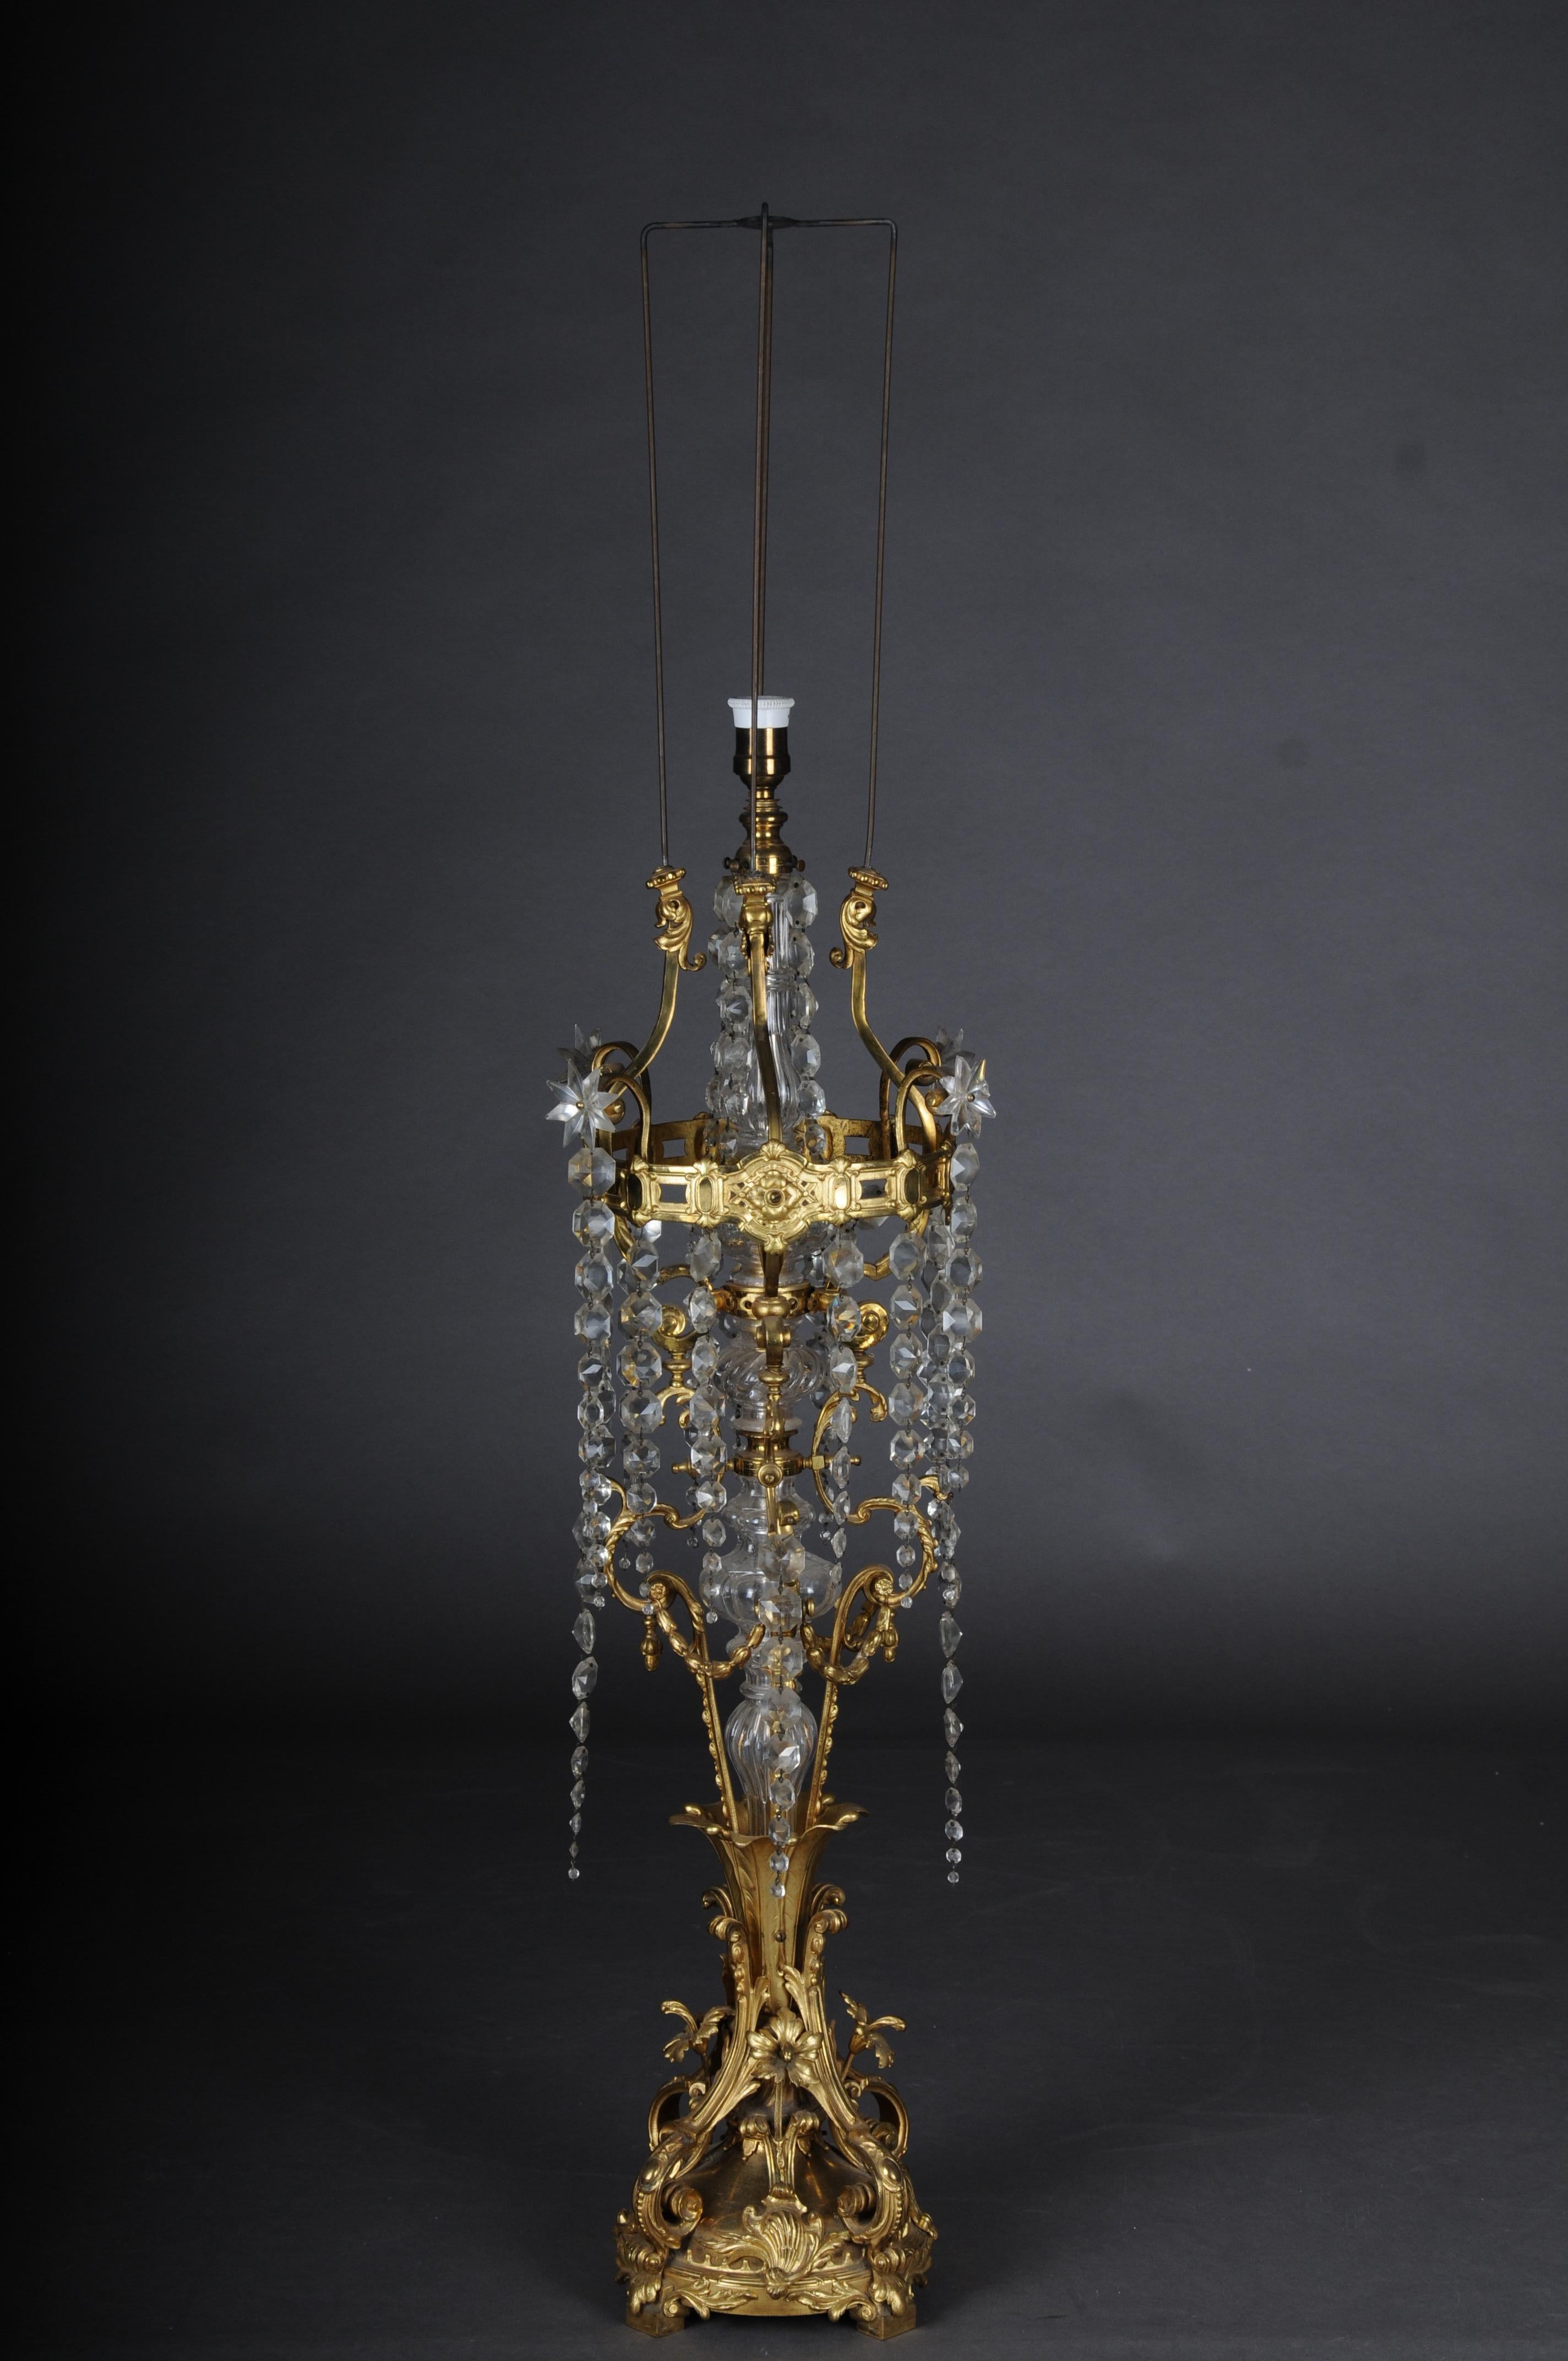 Antique magnificent floor lamp, bronze, gold Napoleon III.

Voluminous body with curved bronze arms. Lavishly with crystal curtains.
Solid gilt bronze base with curved volutes in Louis XV style.

Finely cast and chased bronze elements,